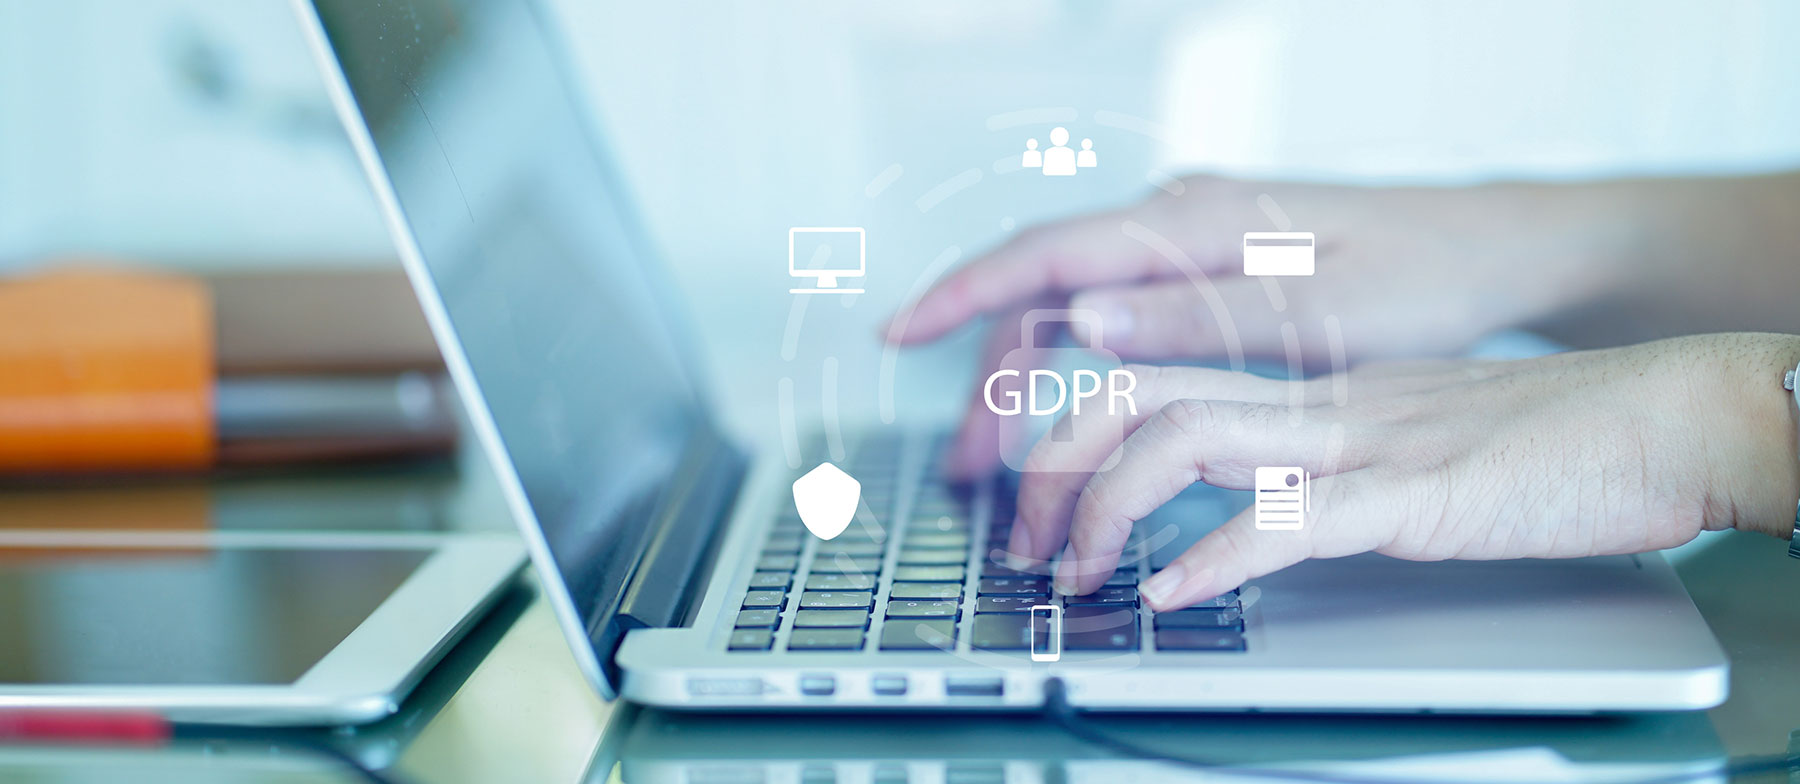 Is Your Visitor Management Process GDPR-Compliant?